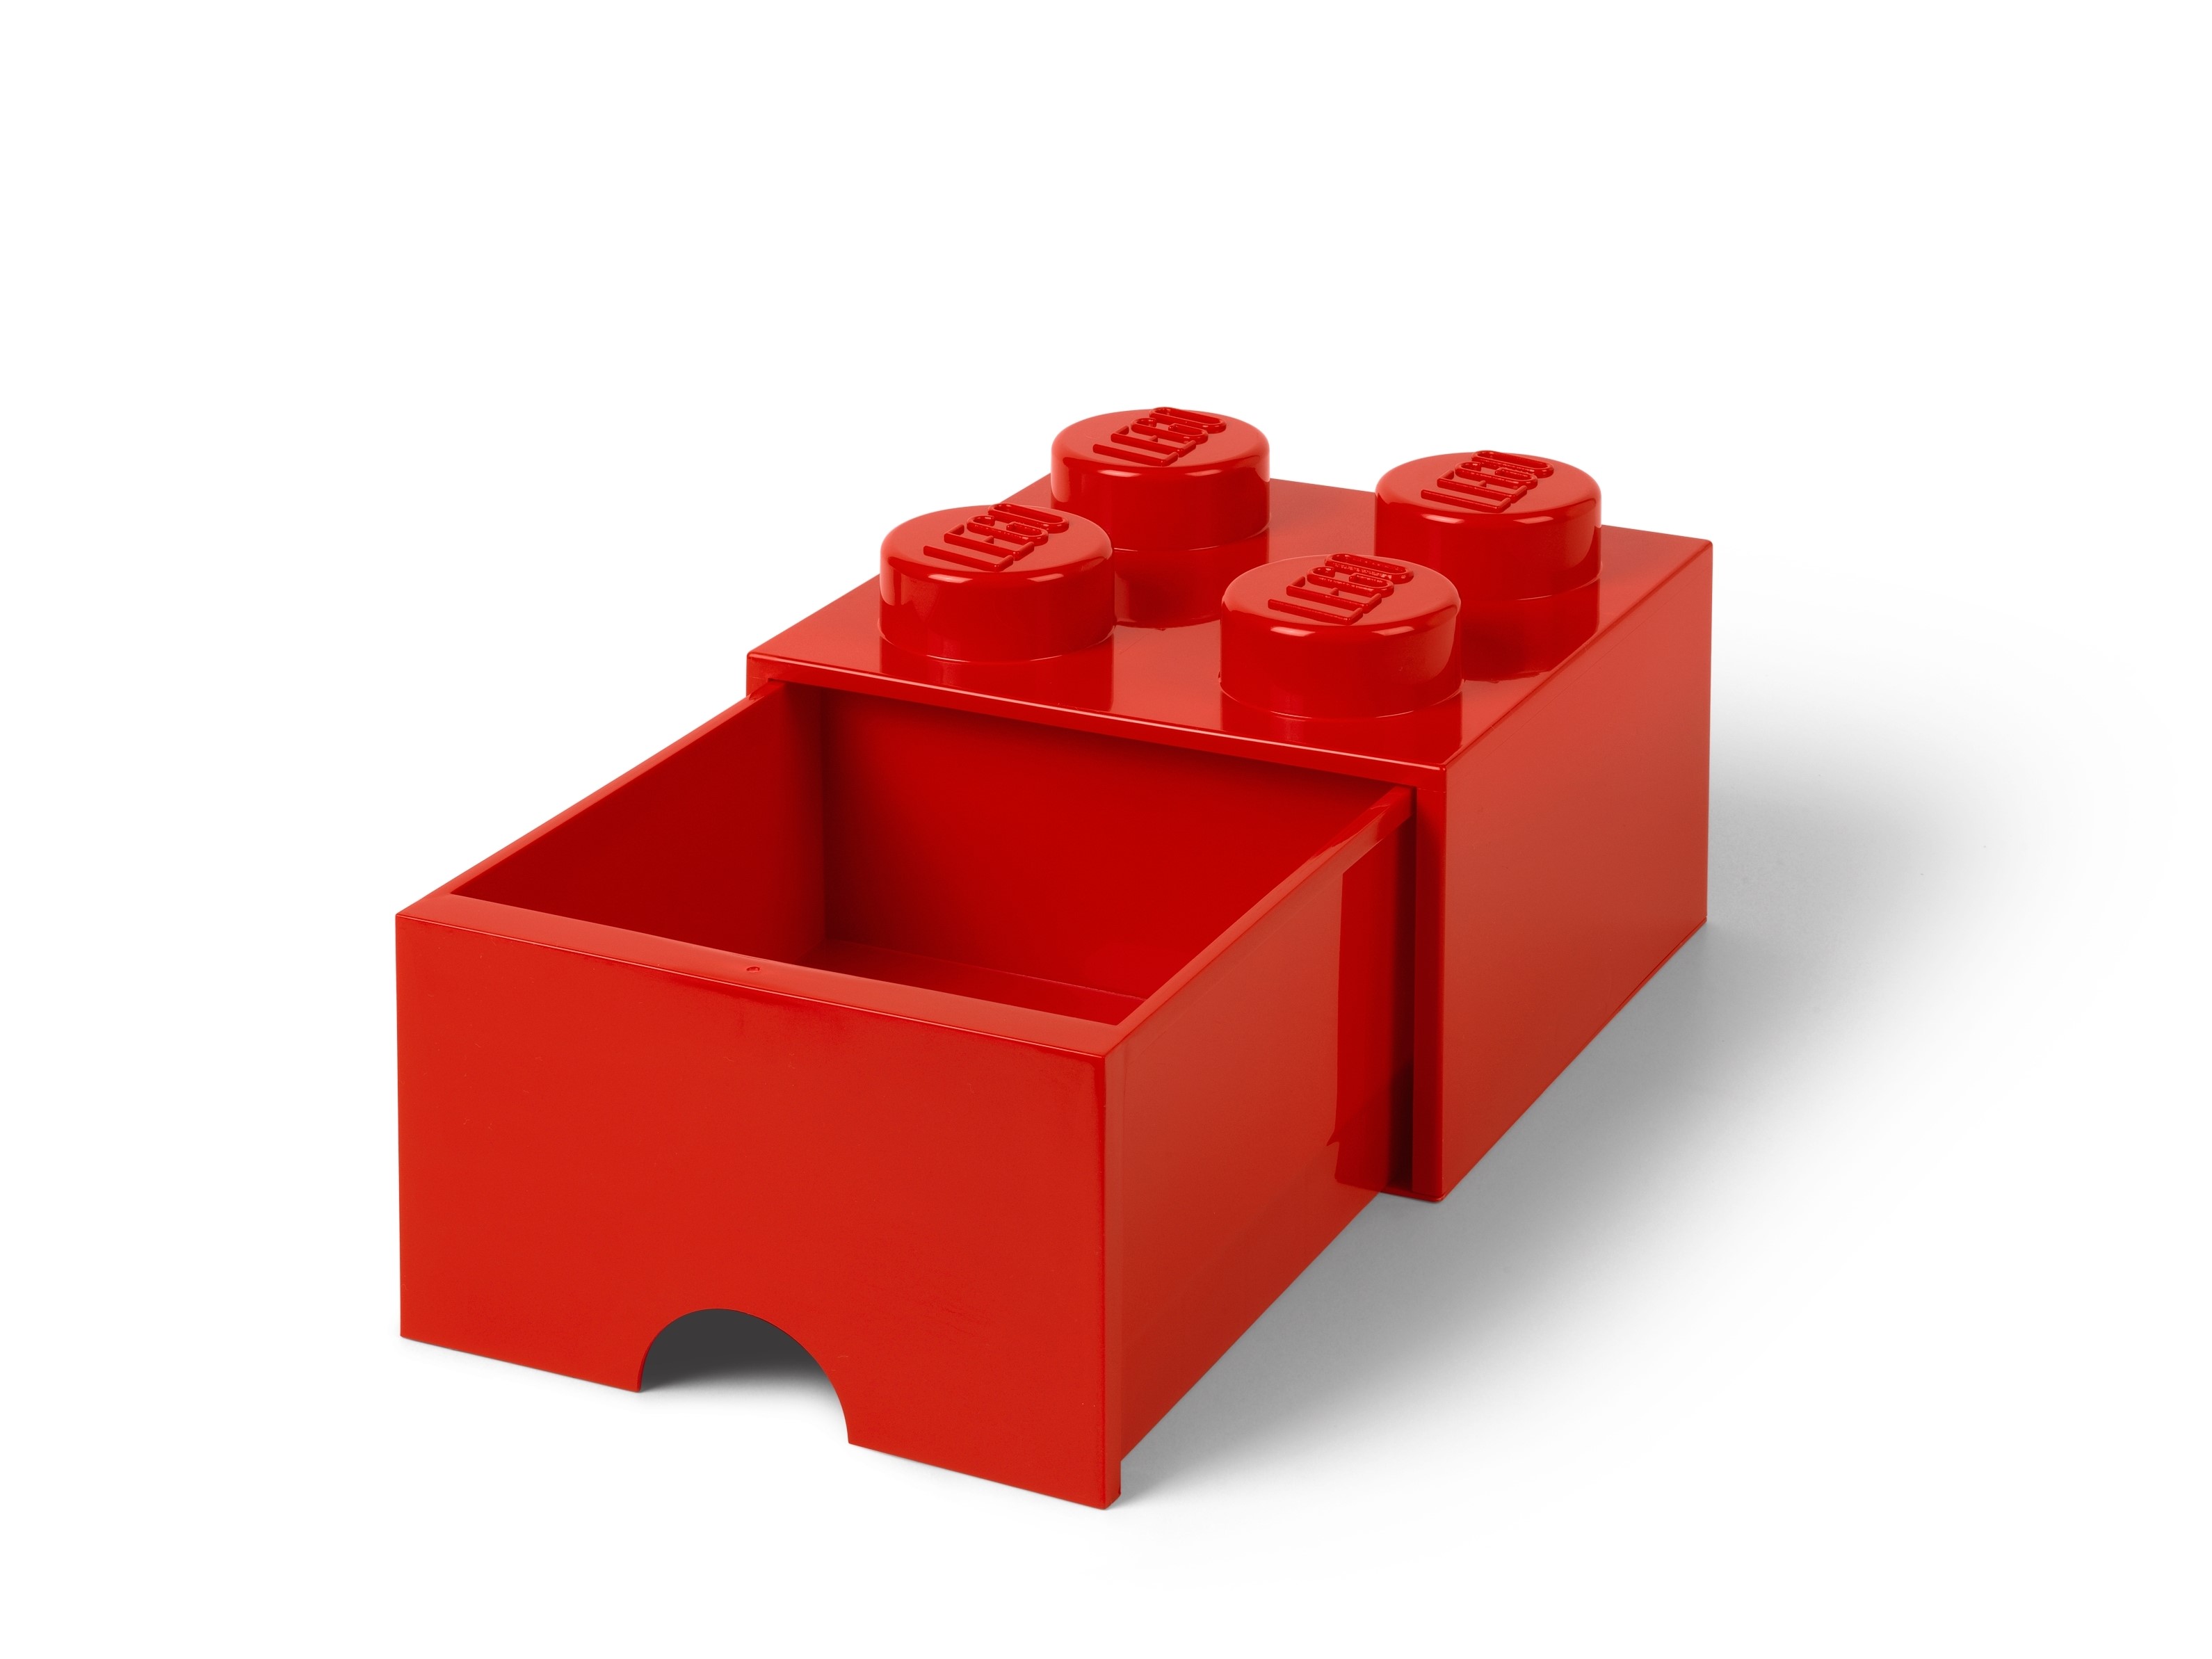 RED BEDROOM LEGO STORAGE BRICK 4 NEW OFFICIAL 